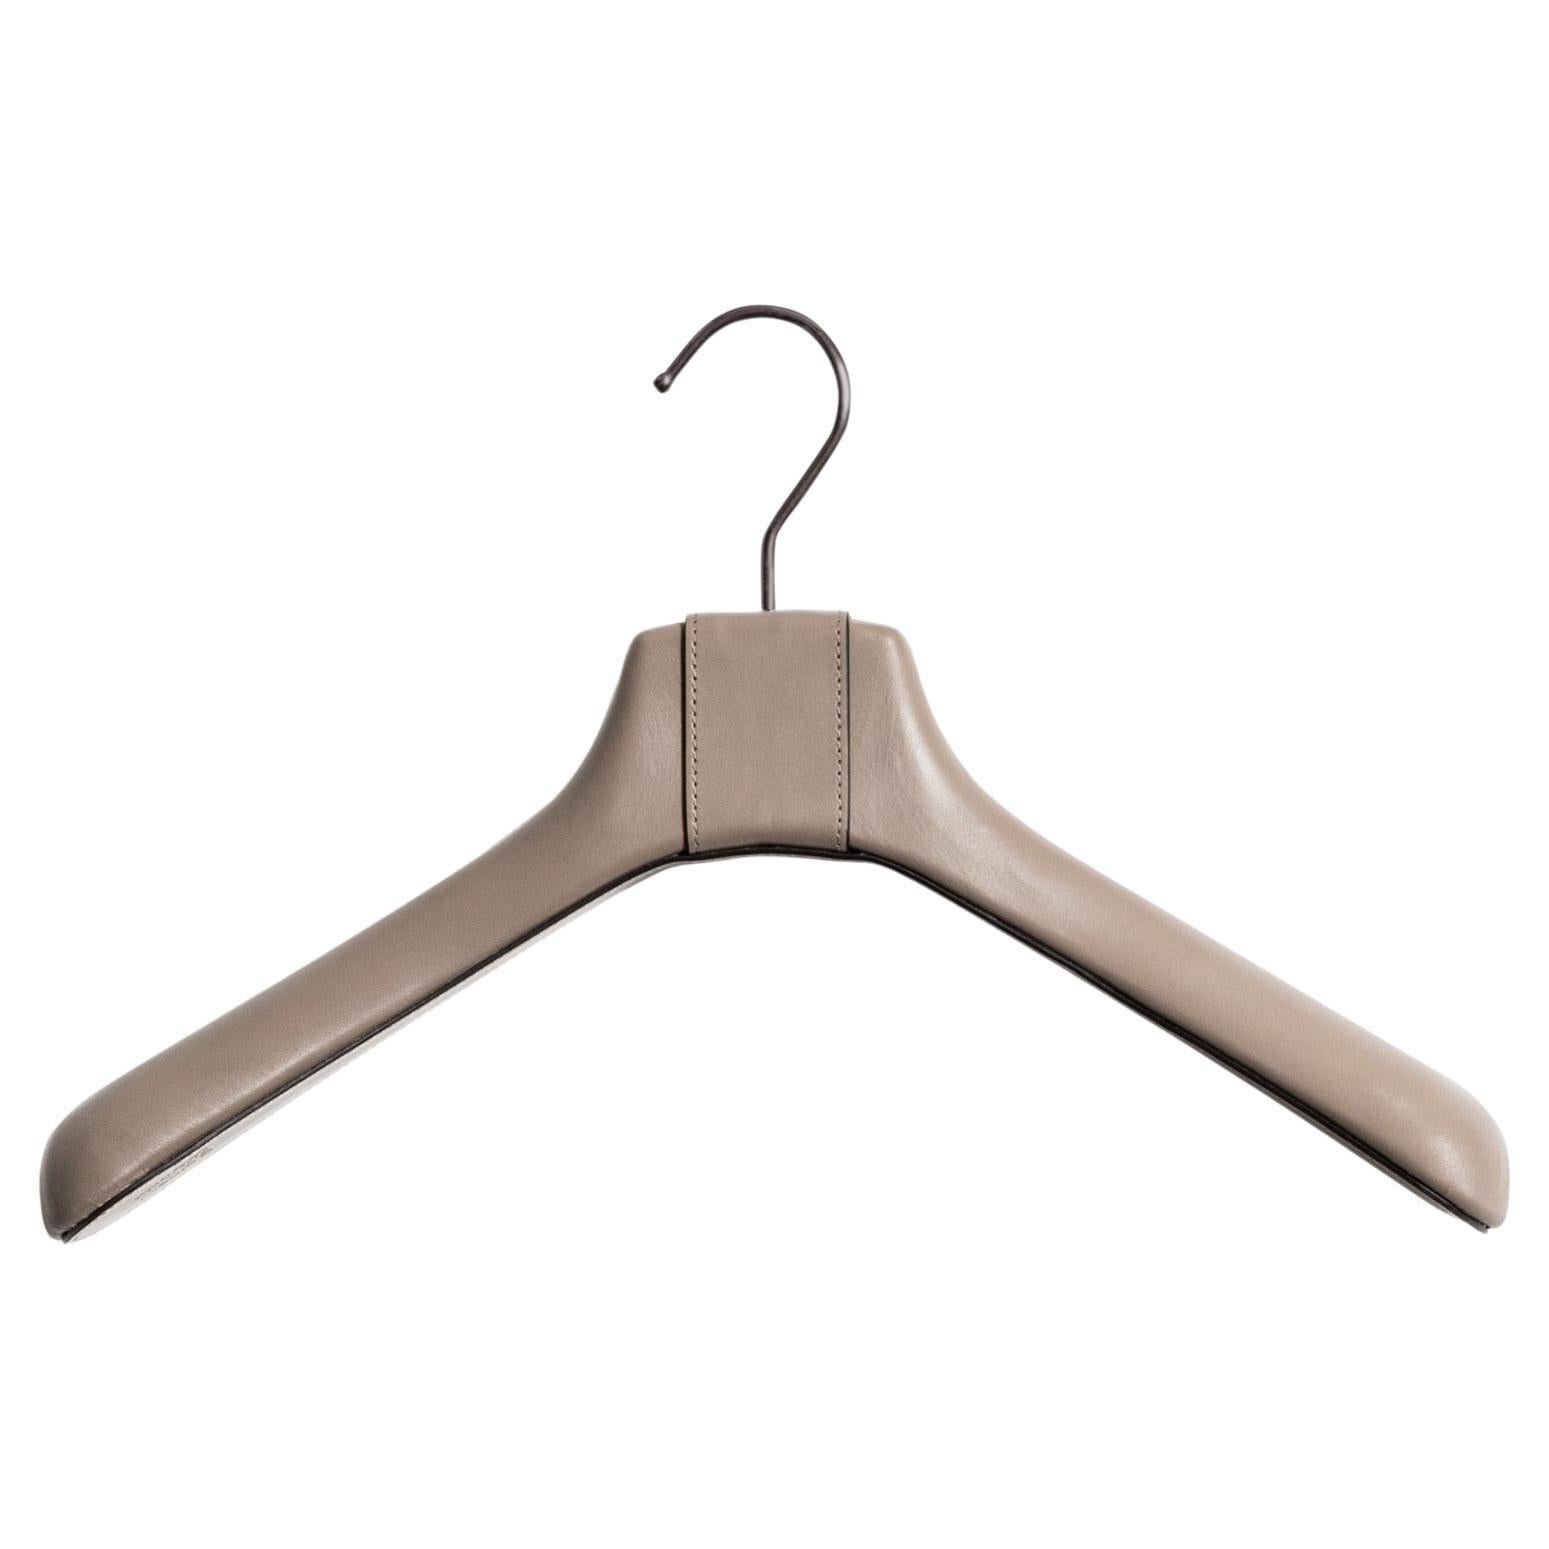 The sophisticated addition to transform in an instant the look of your closet.

Made with a solid wood structure each hanger is fully dressed in premium calfskin leather with a soft and natural touch. The non-slip surface make it perfect to ensure